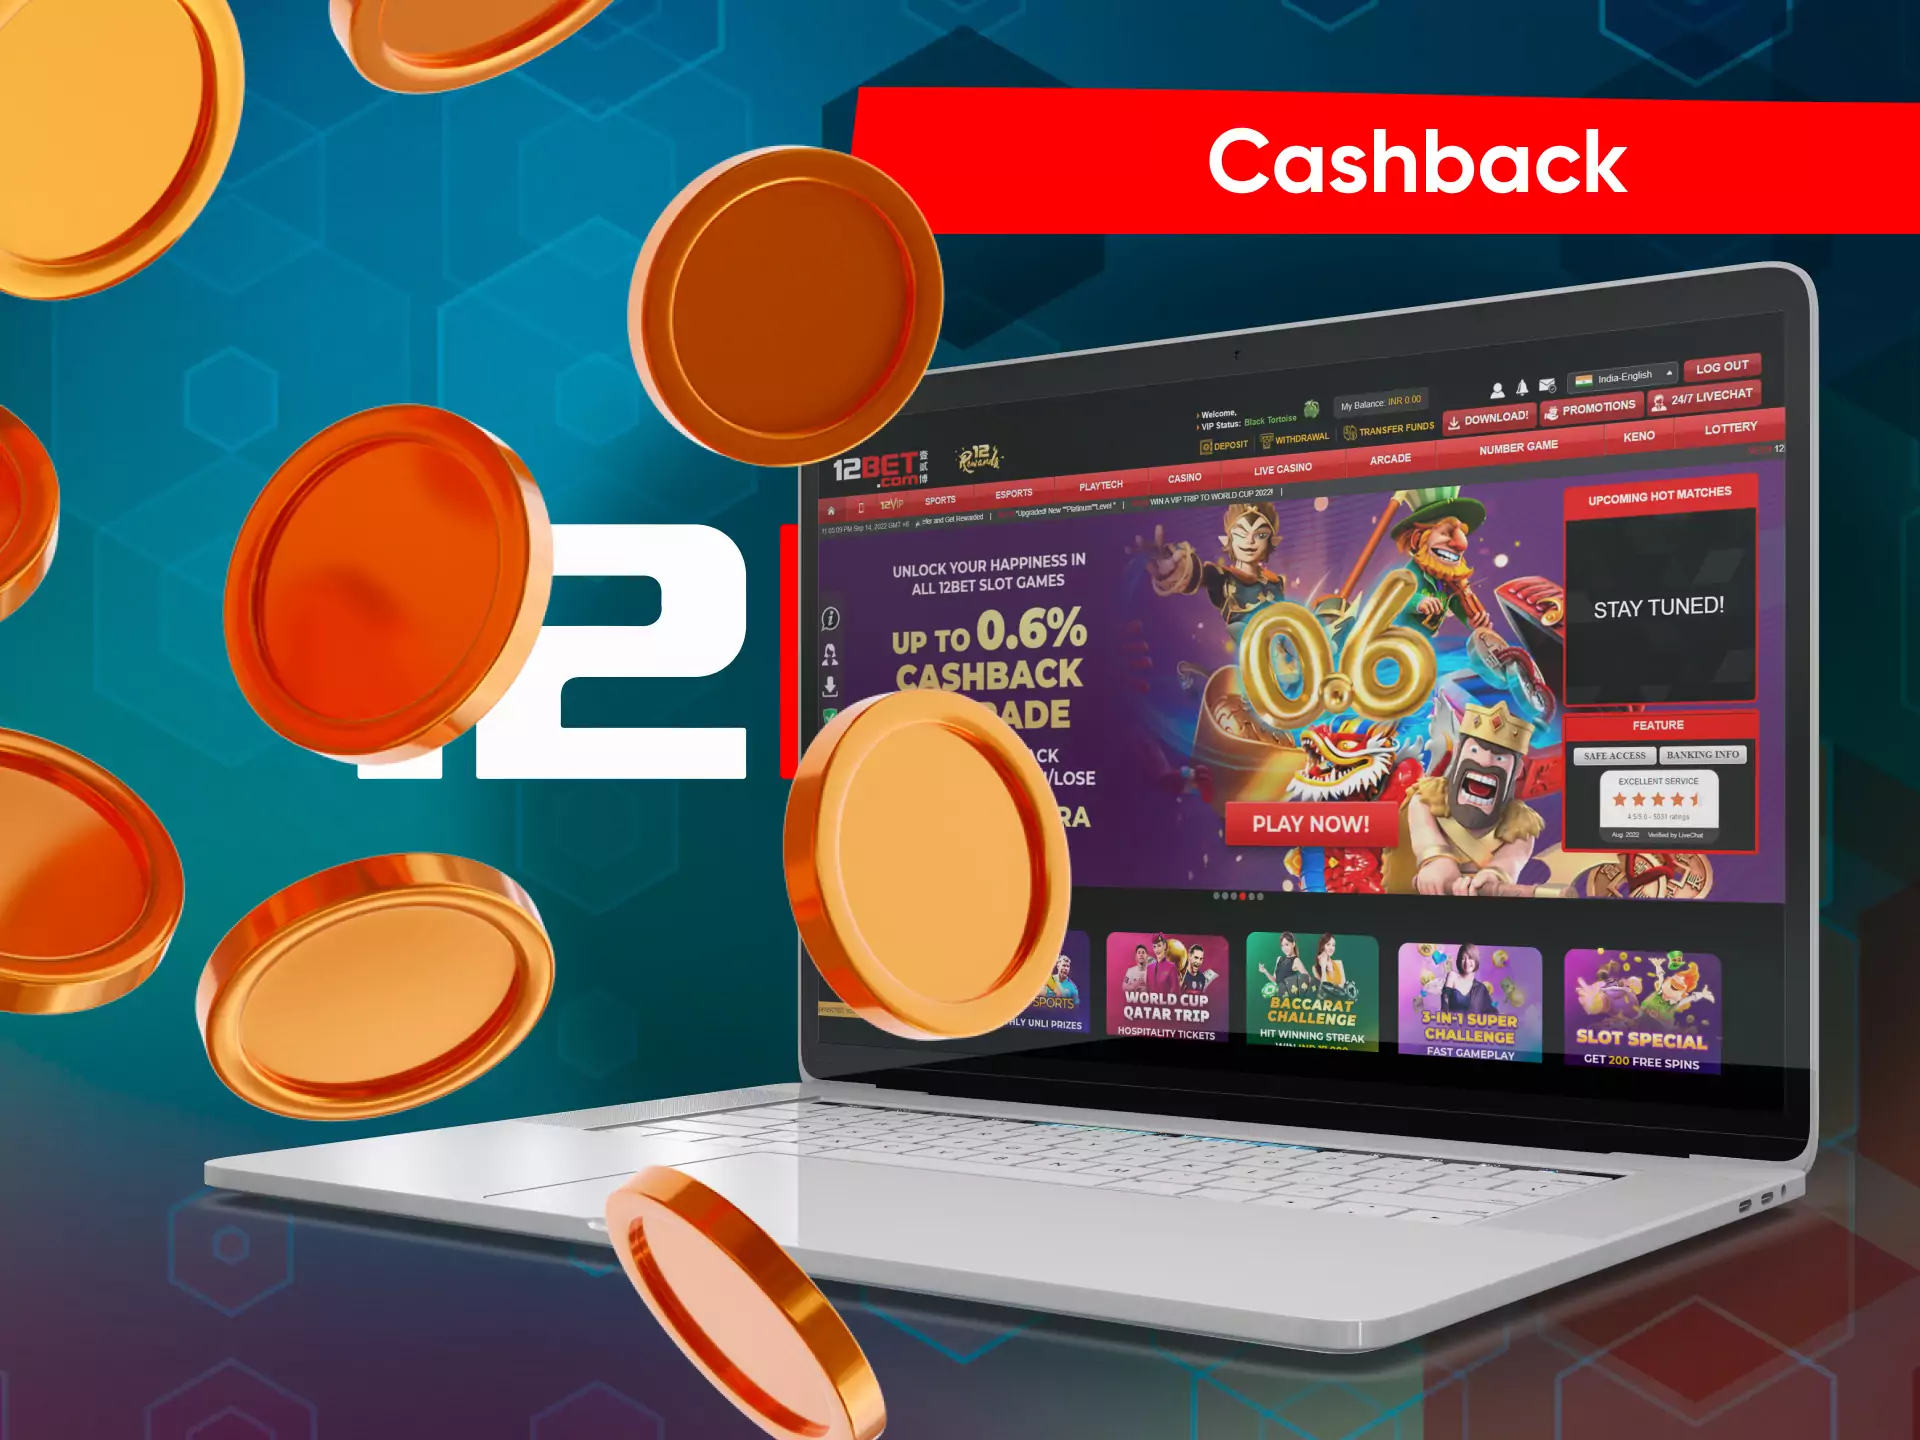 You can turn back a part of your money thanking the 12bet cashback program.